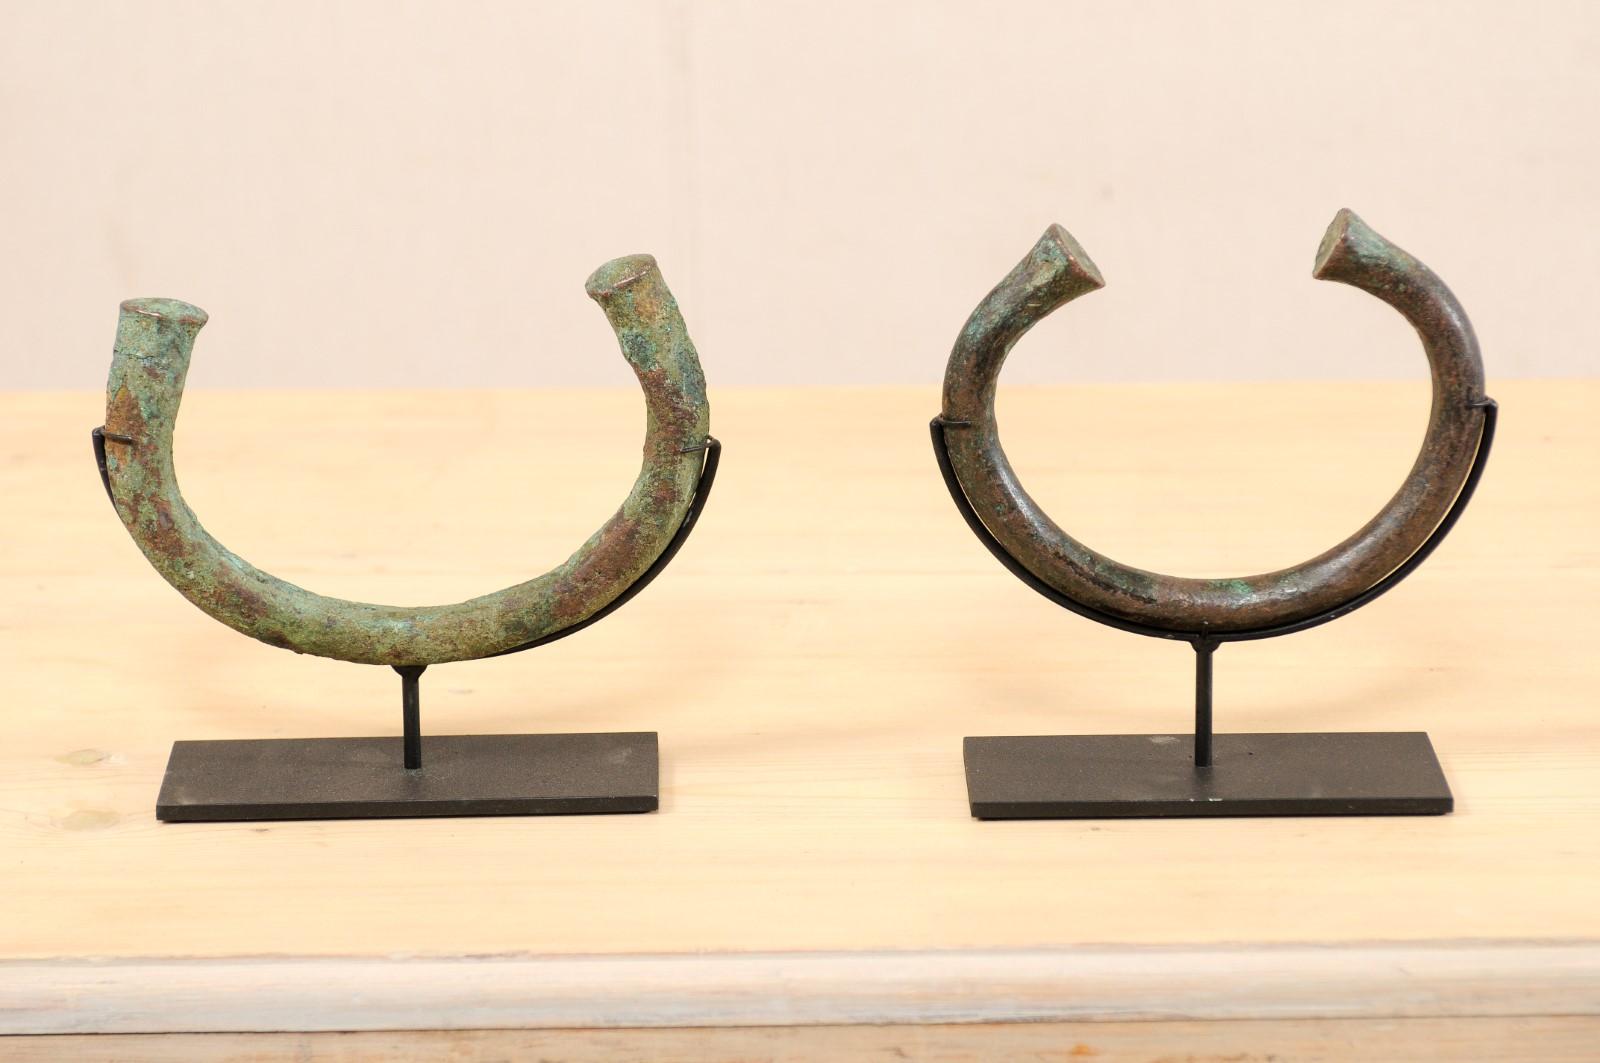 A pair of African manilla trade currencies from the Igbo People of Central Nigeria, West Africa. Manilla bracelets (a form of money) were commonly used throughout Nigeria and surrounding areas for centuries to purchase slaves, ivory, and other trade